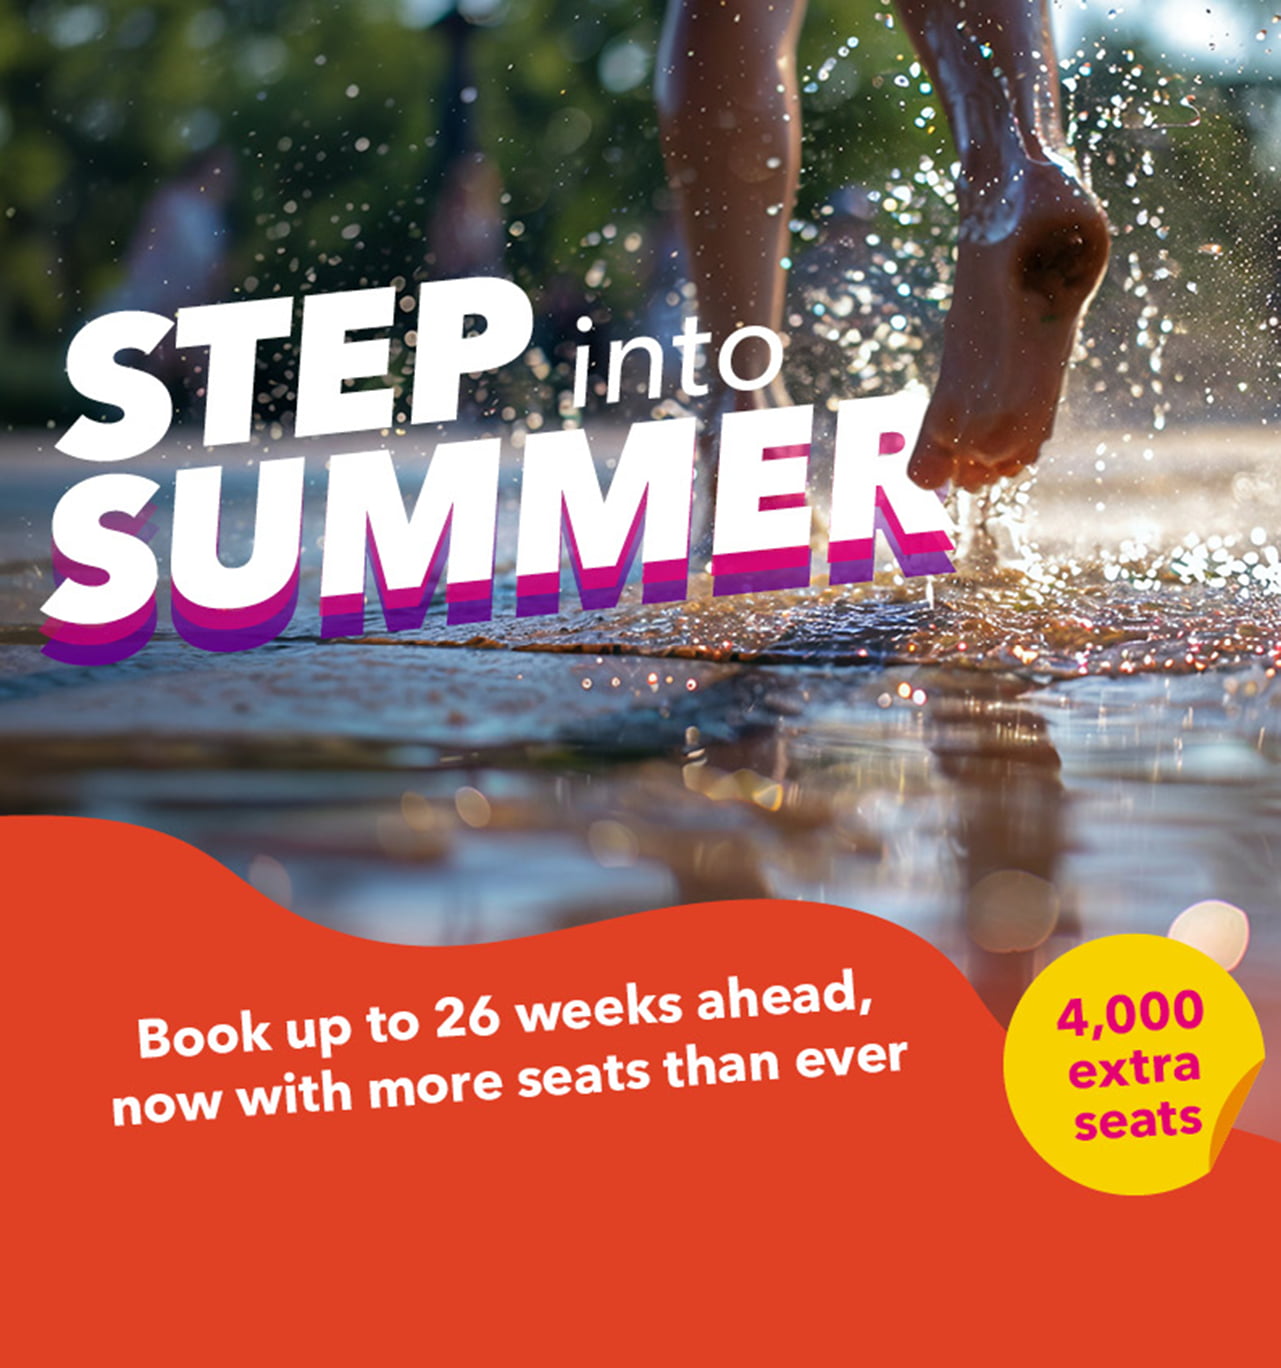 Step into summer with Hull Trains and 4000 extra seats a week